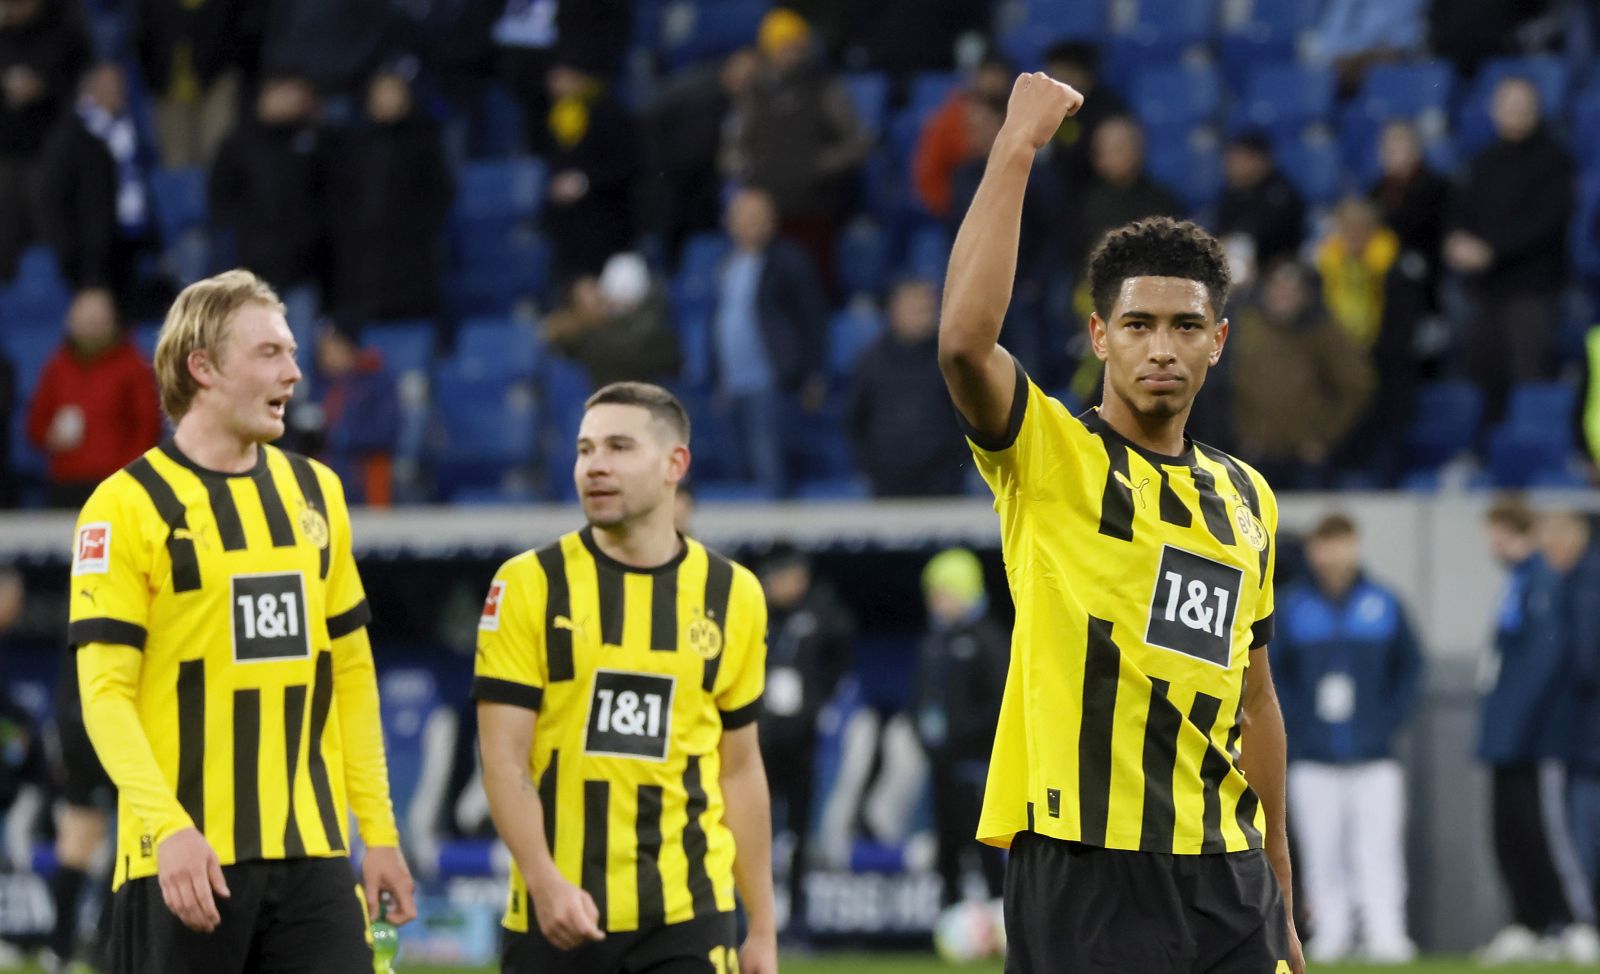 epa10490607 Dortmund's Jude Bellingham (R) celebrates after winning the German Bundesliga soccer match between TSG 1899 Hoffenheim and Borussia Dortmund in Sinsheim, Germany, 25 February 2023.  EPA/RONALD WITTEK CONDITIONS - ATTENTION: The DFL regulations prohibit any use of photographs as image sequences and/or quasi-video.